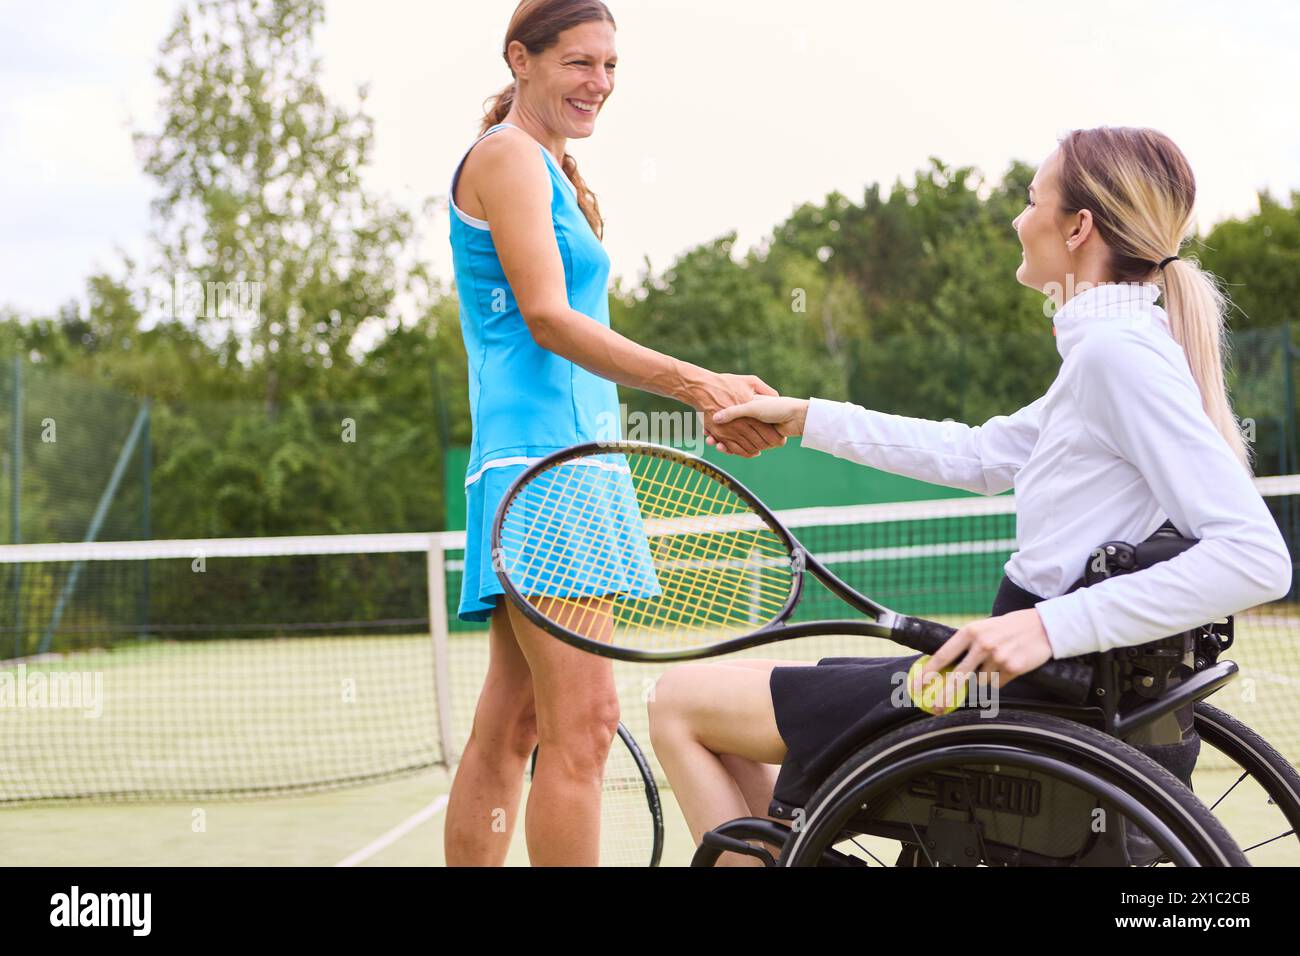 An athlete who uses a wheelchair celebrating teamwork with a standing player on a tennis court, promoting accessibility and inclusion. Stock Photo